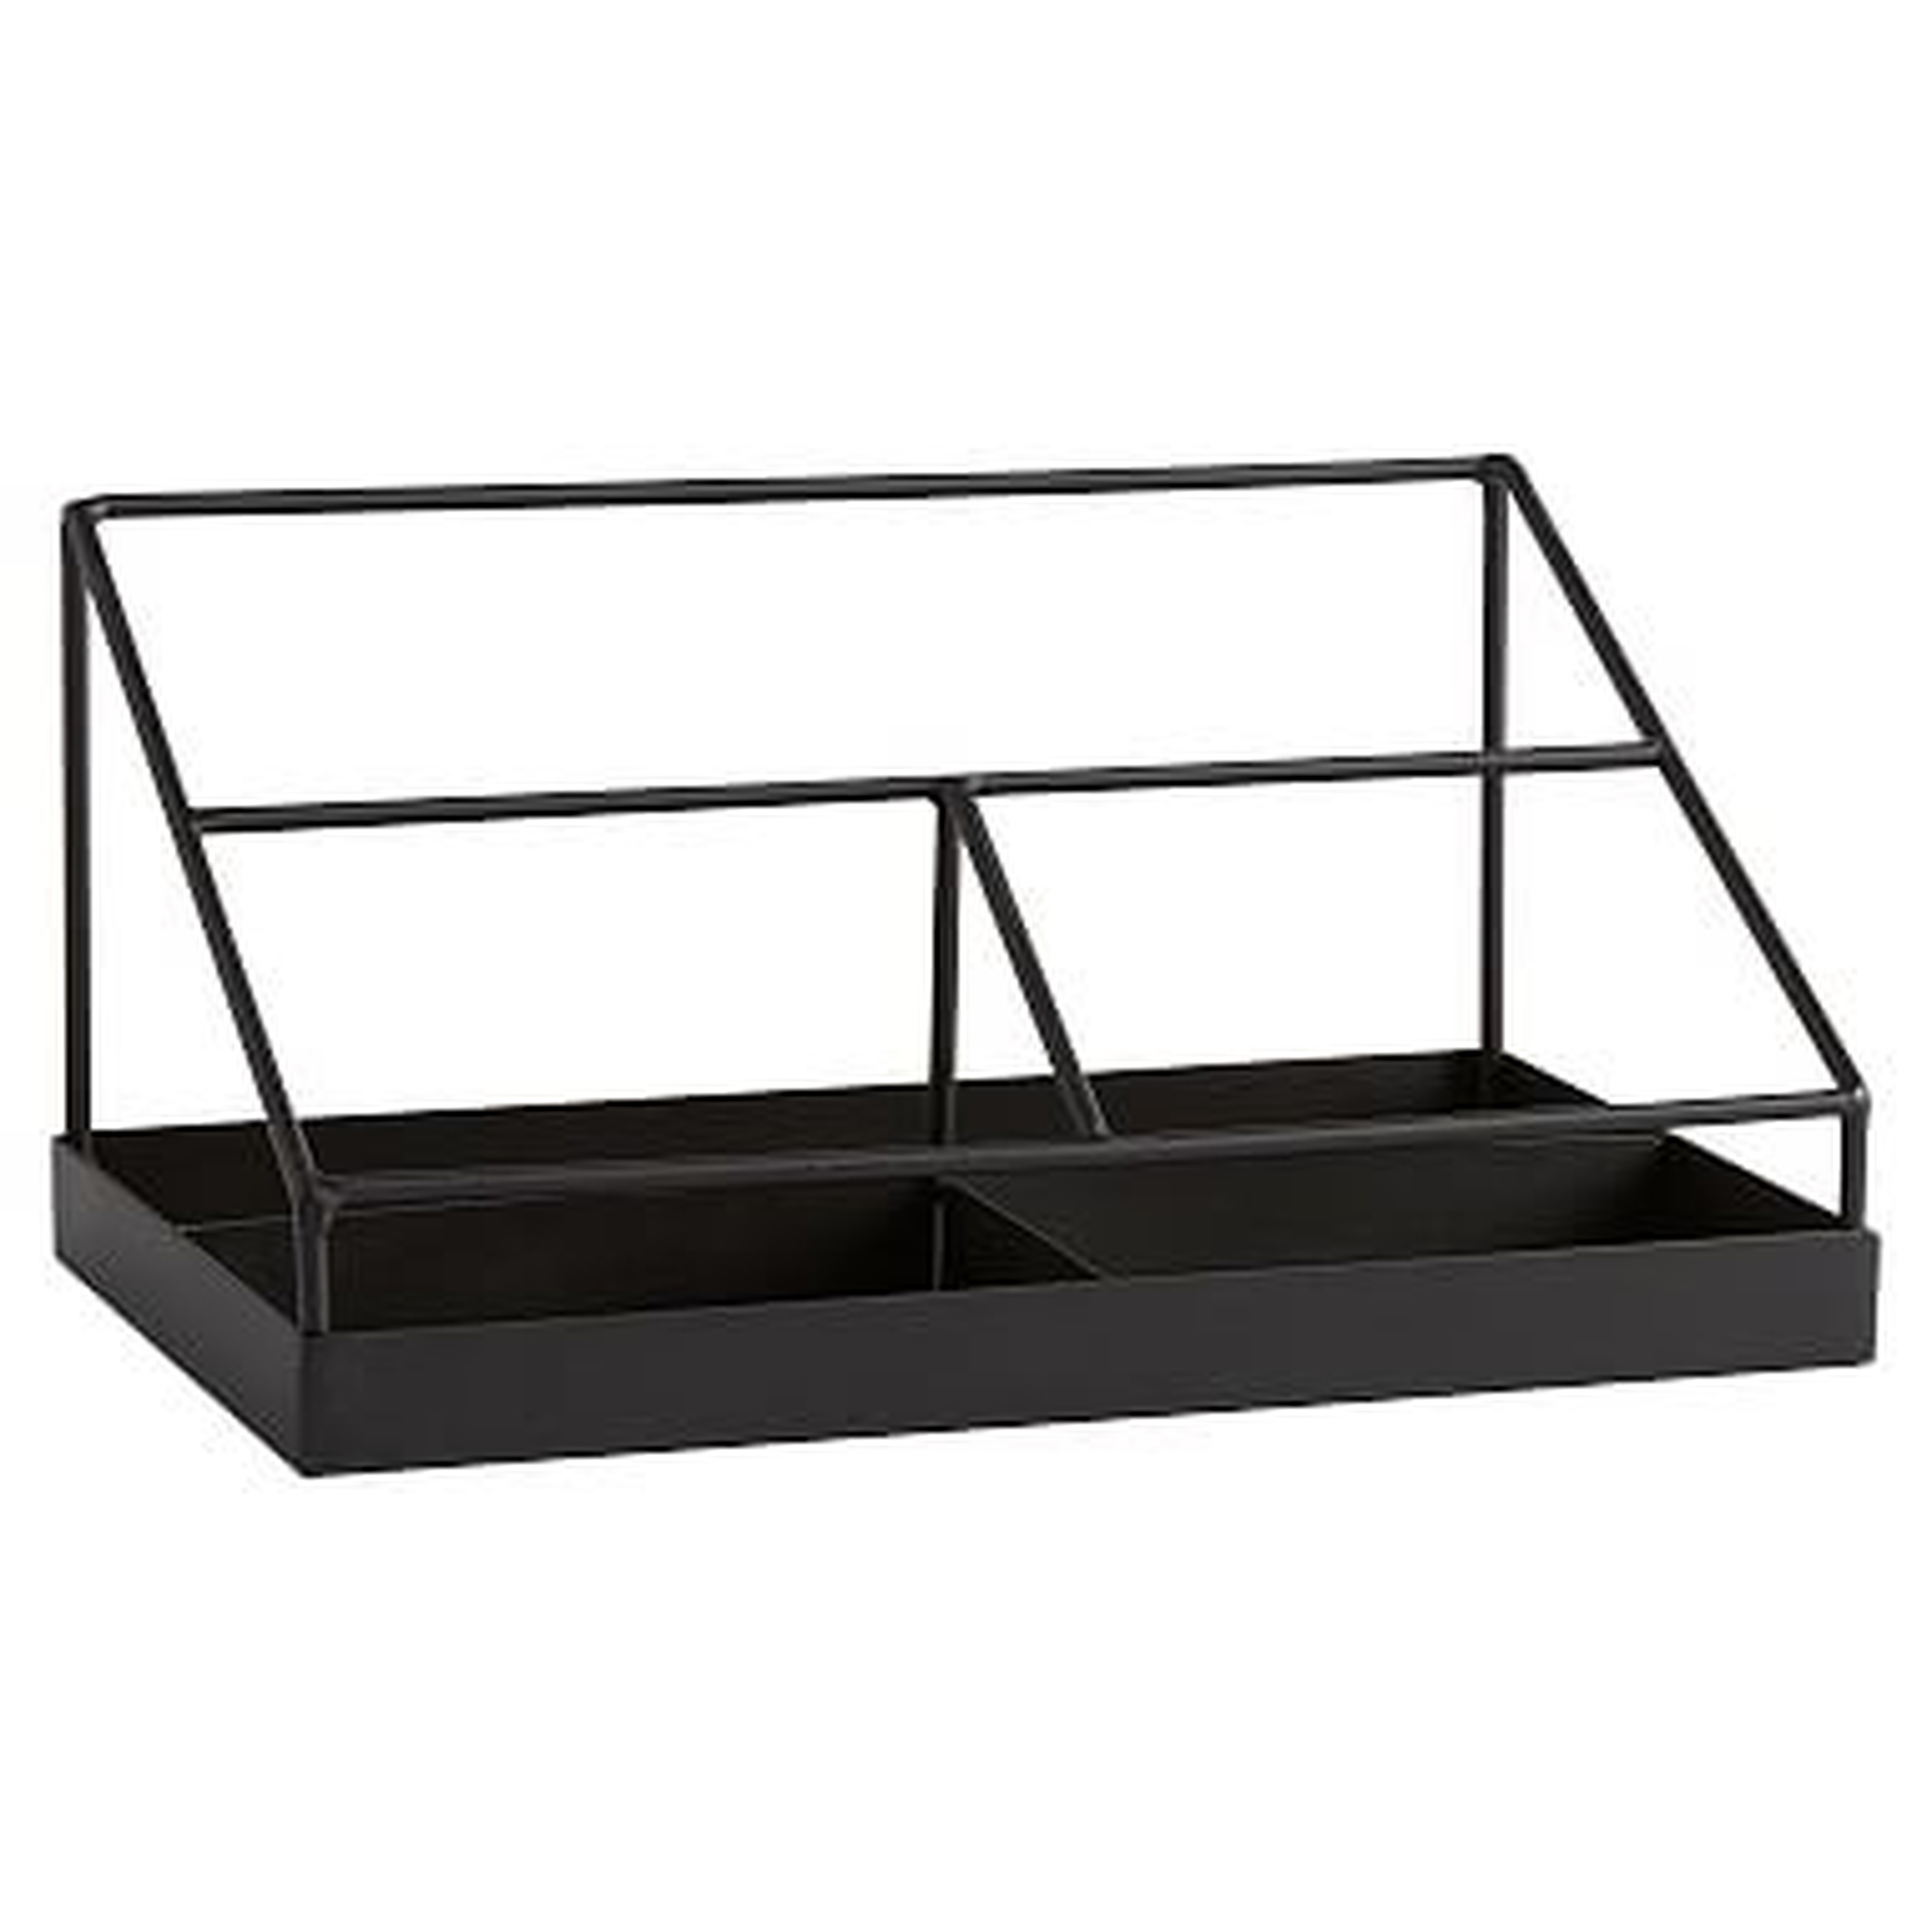 Silhouette Desk Accessories, Sectional, Charcoal - Pottery Barn Teen